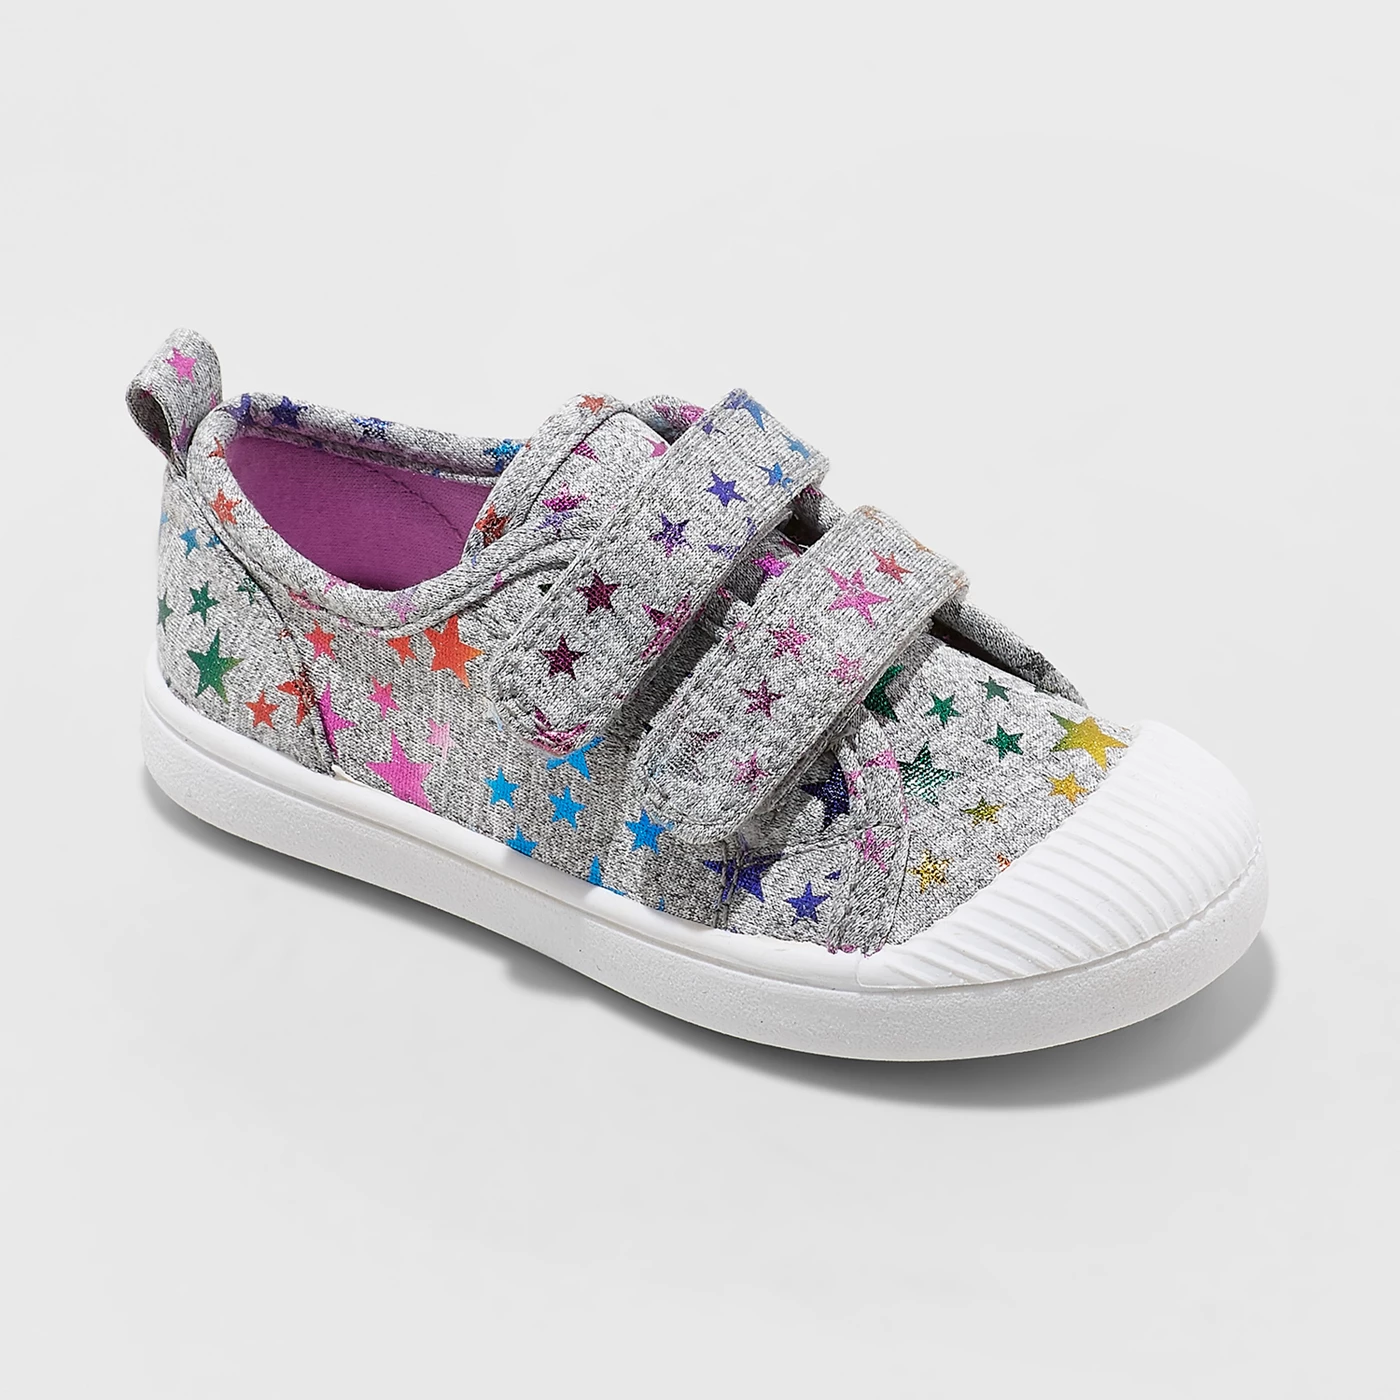 Toddler Girls' Madge Adjustable Easy Close Sneakers - Cat & Jackâ¢ - image 1 of 3